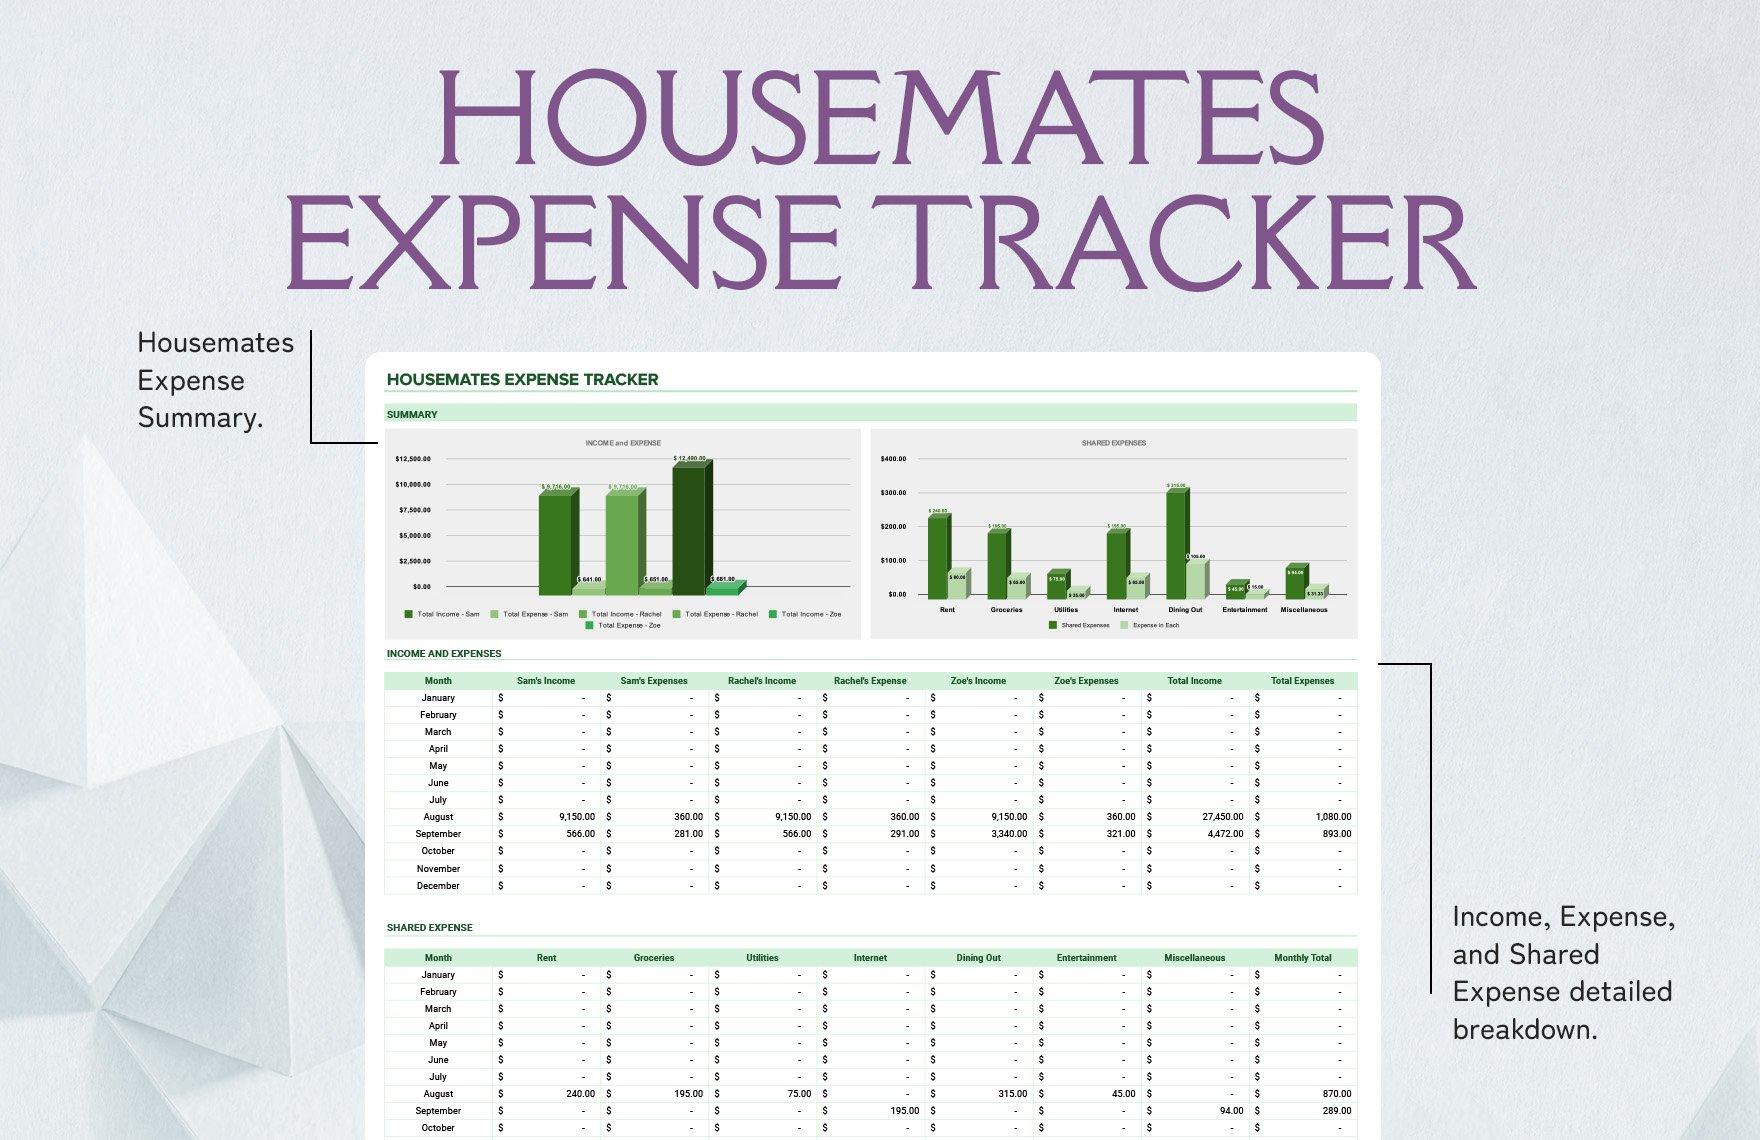 Housemates Expense tracker template